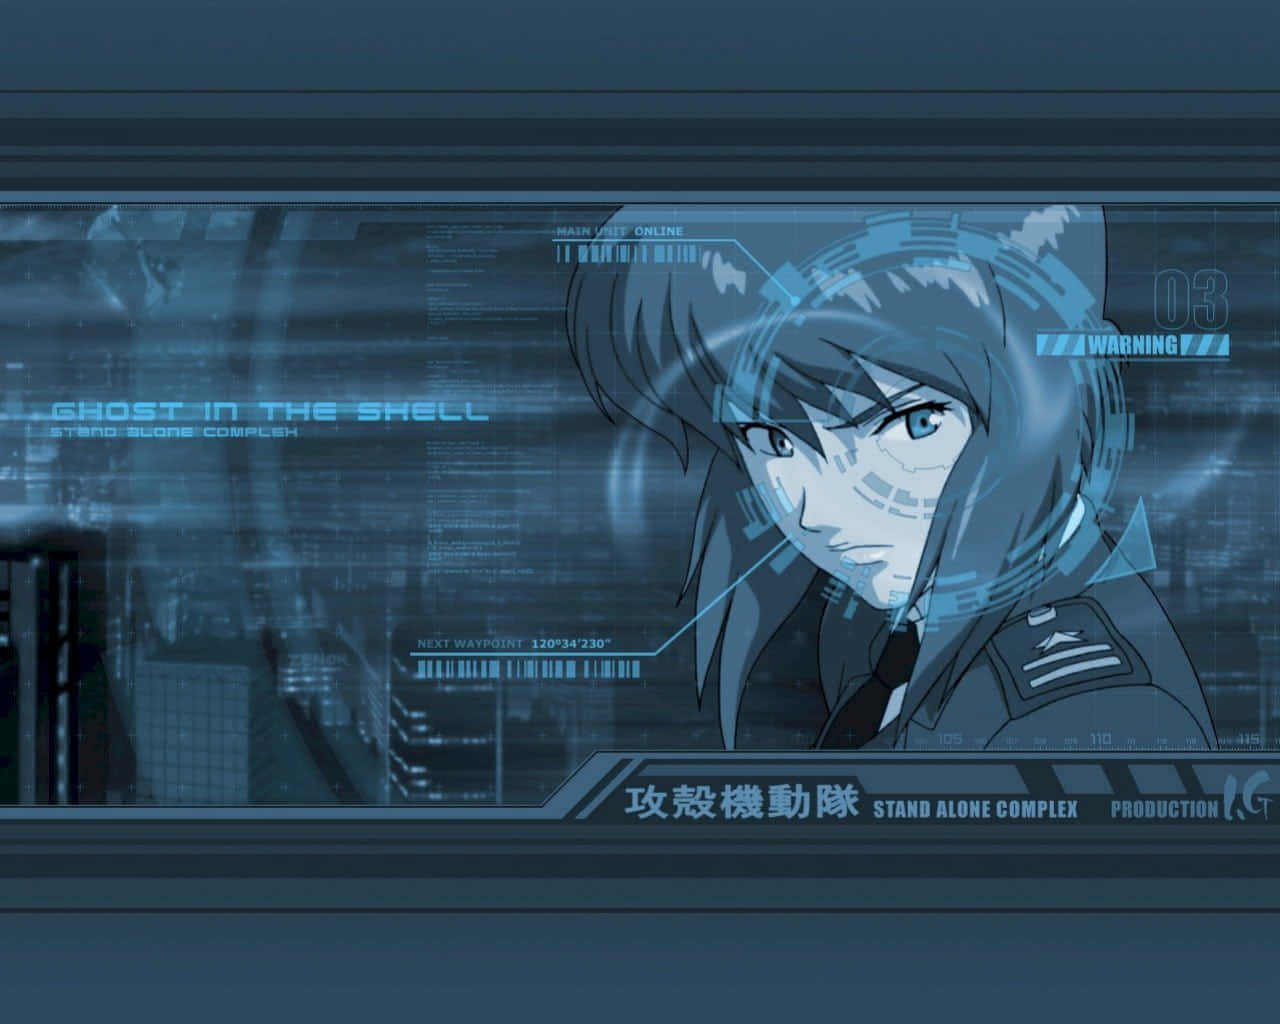 Motoko and her team of Section 9 agents at the ready